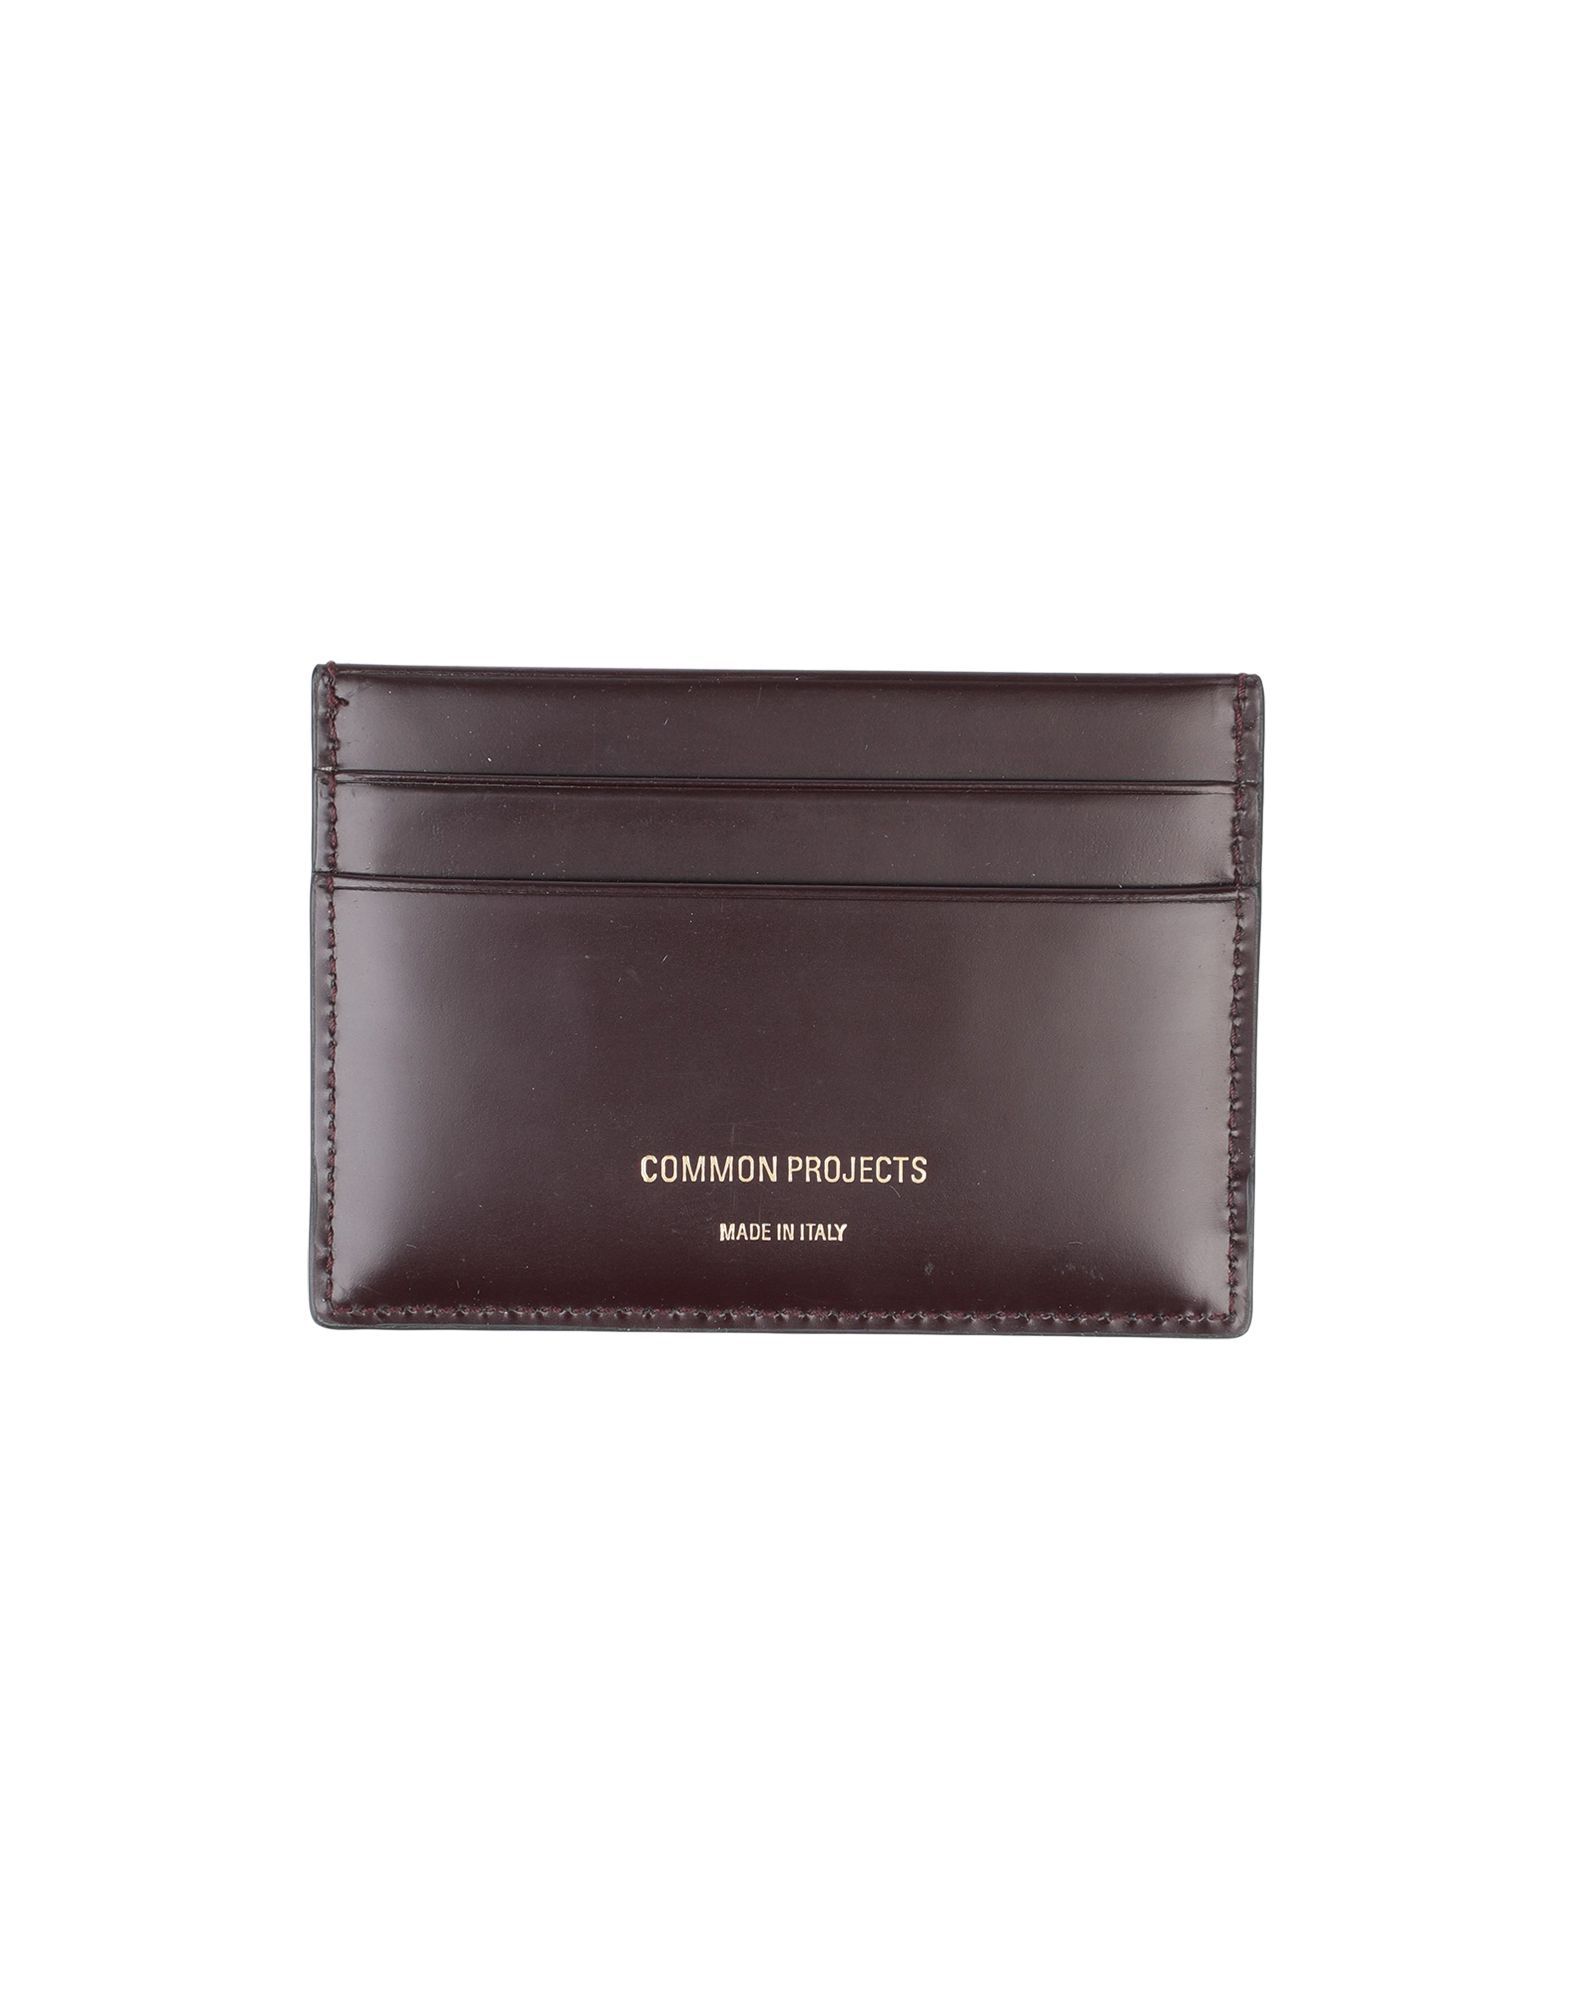 Common Projects Women's Document Holders Leather